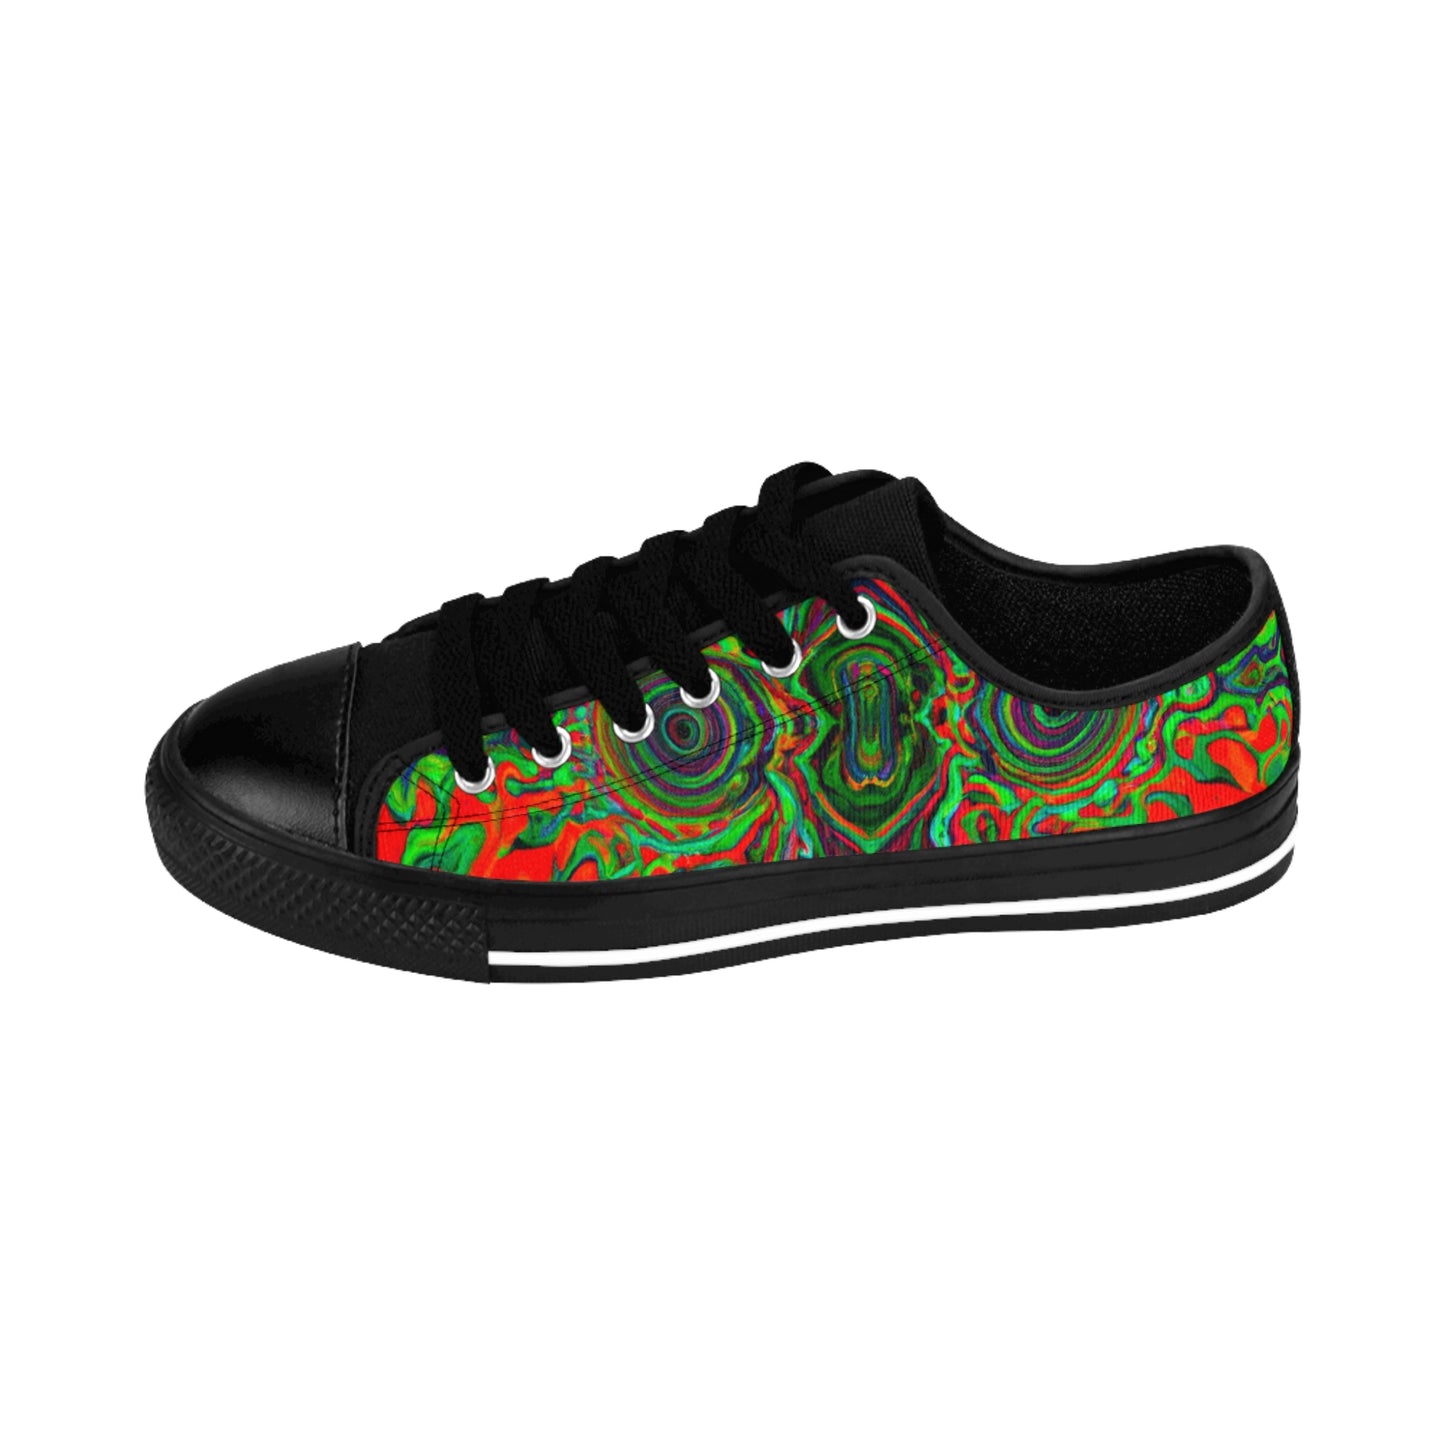 Wolfred the Shoemaker - Psychedelic Low Top